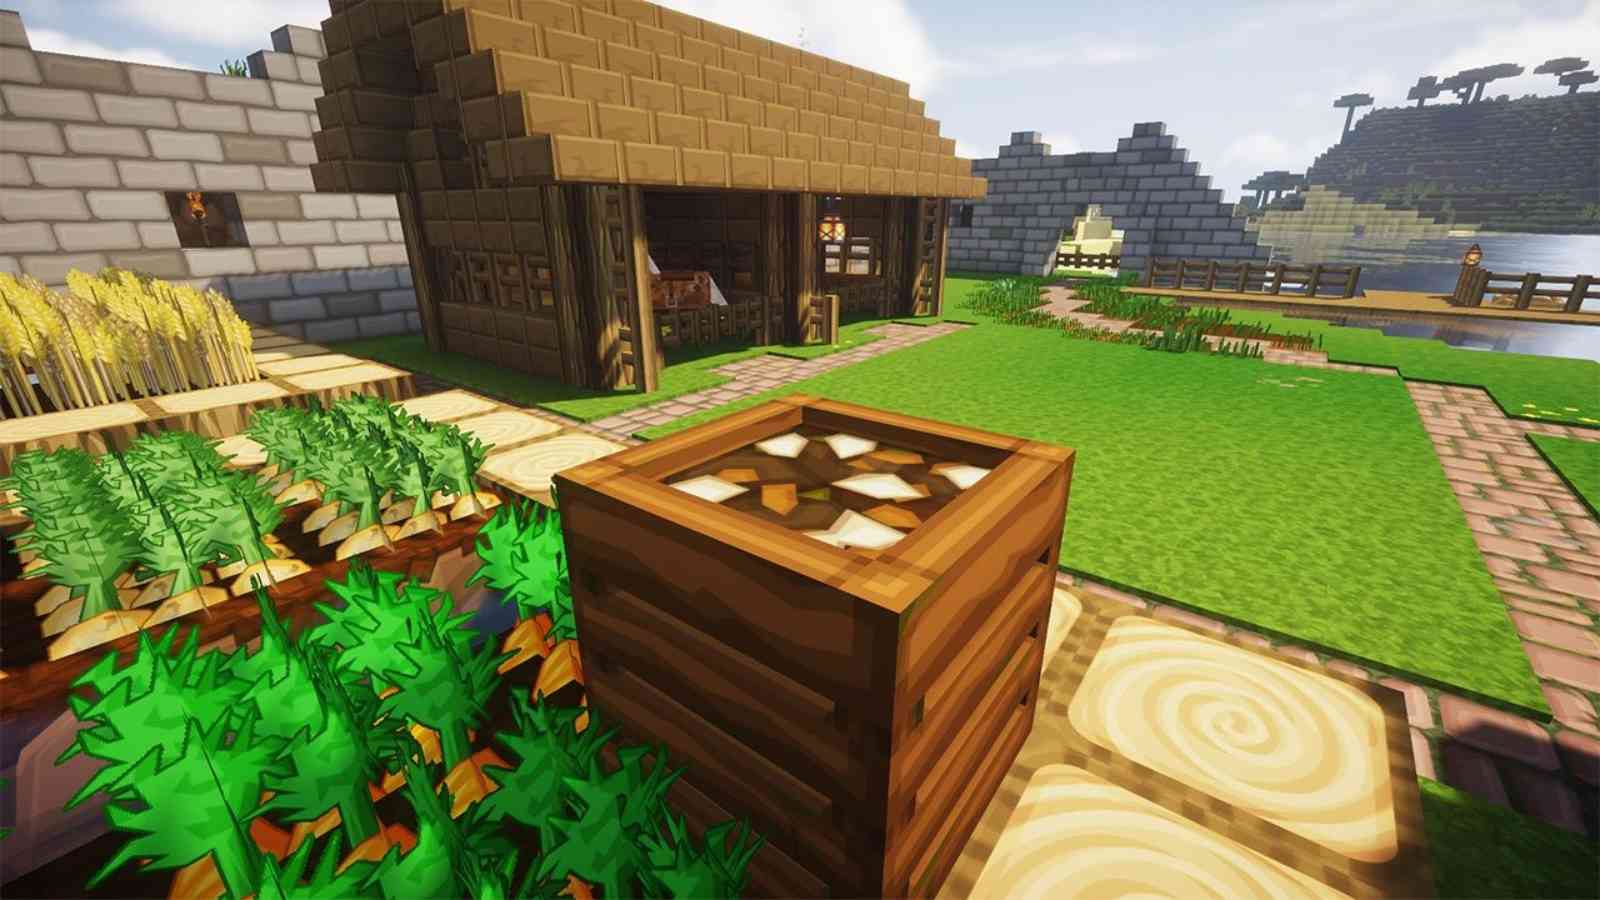 How to use a Composter in Minecraft?